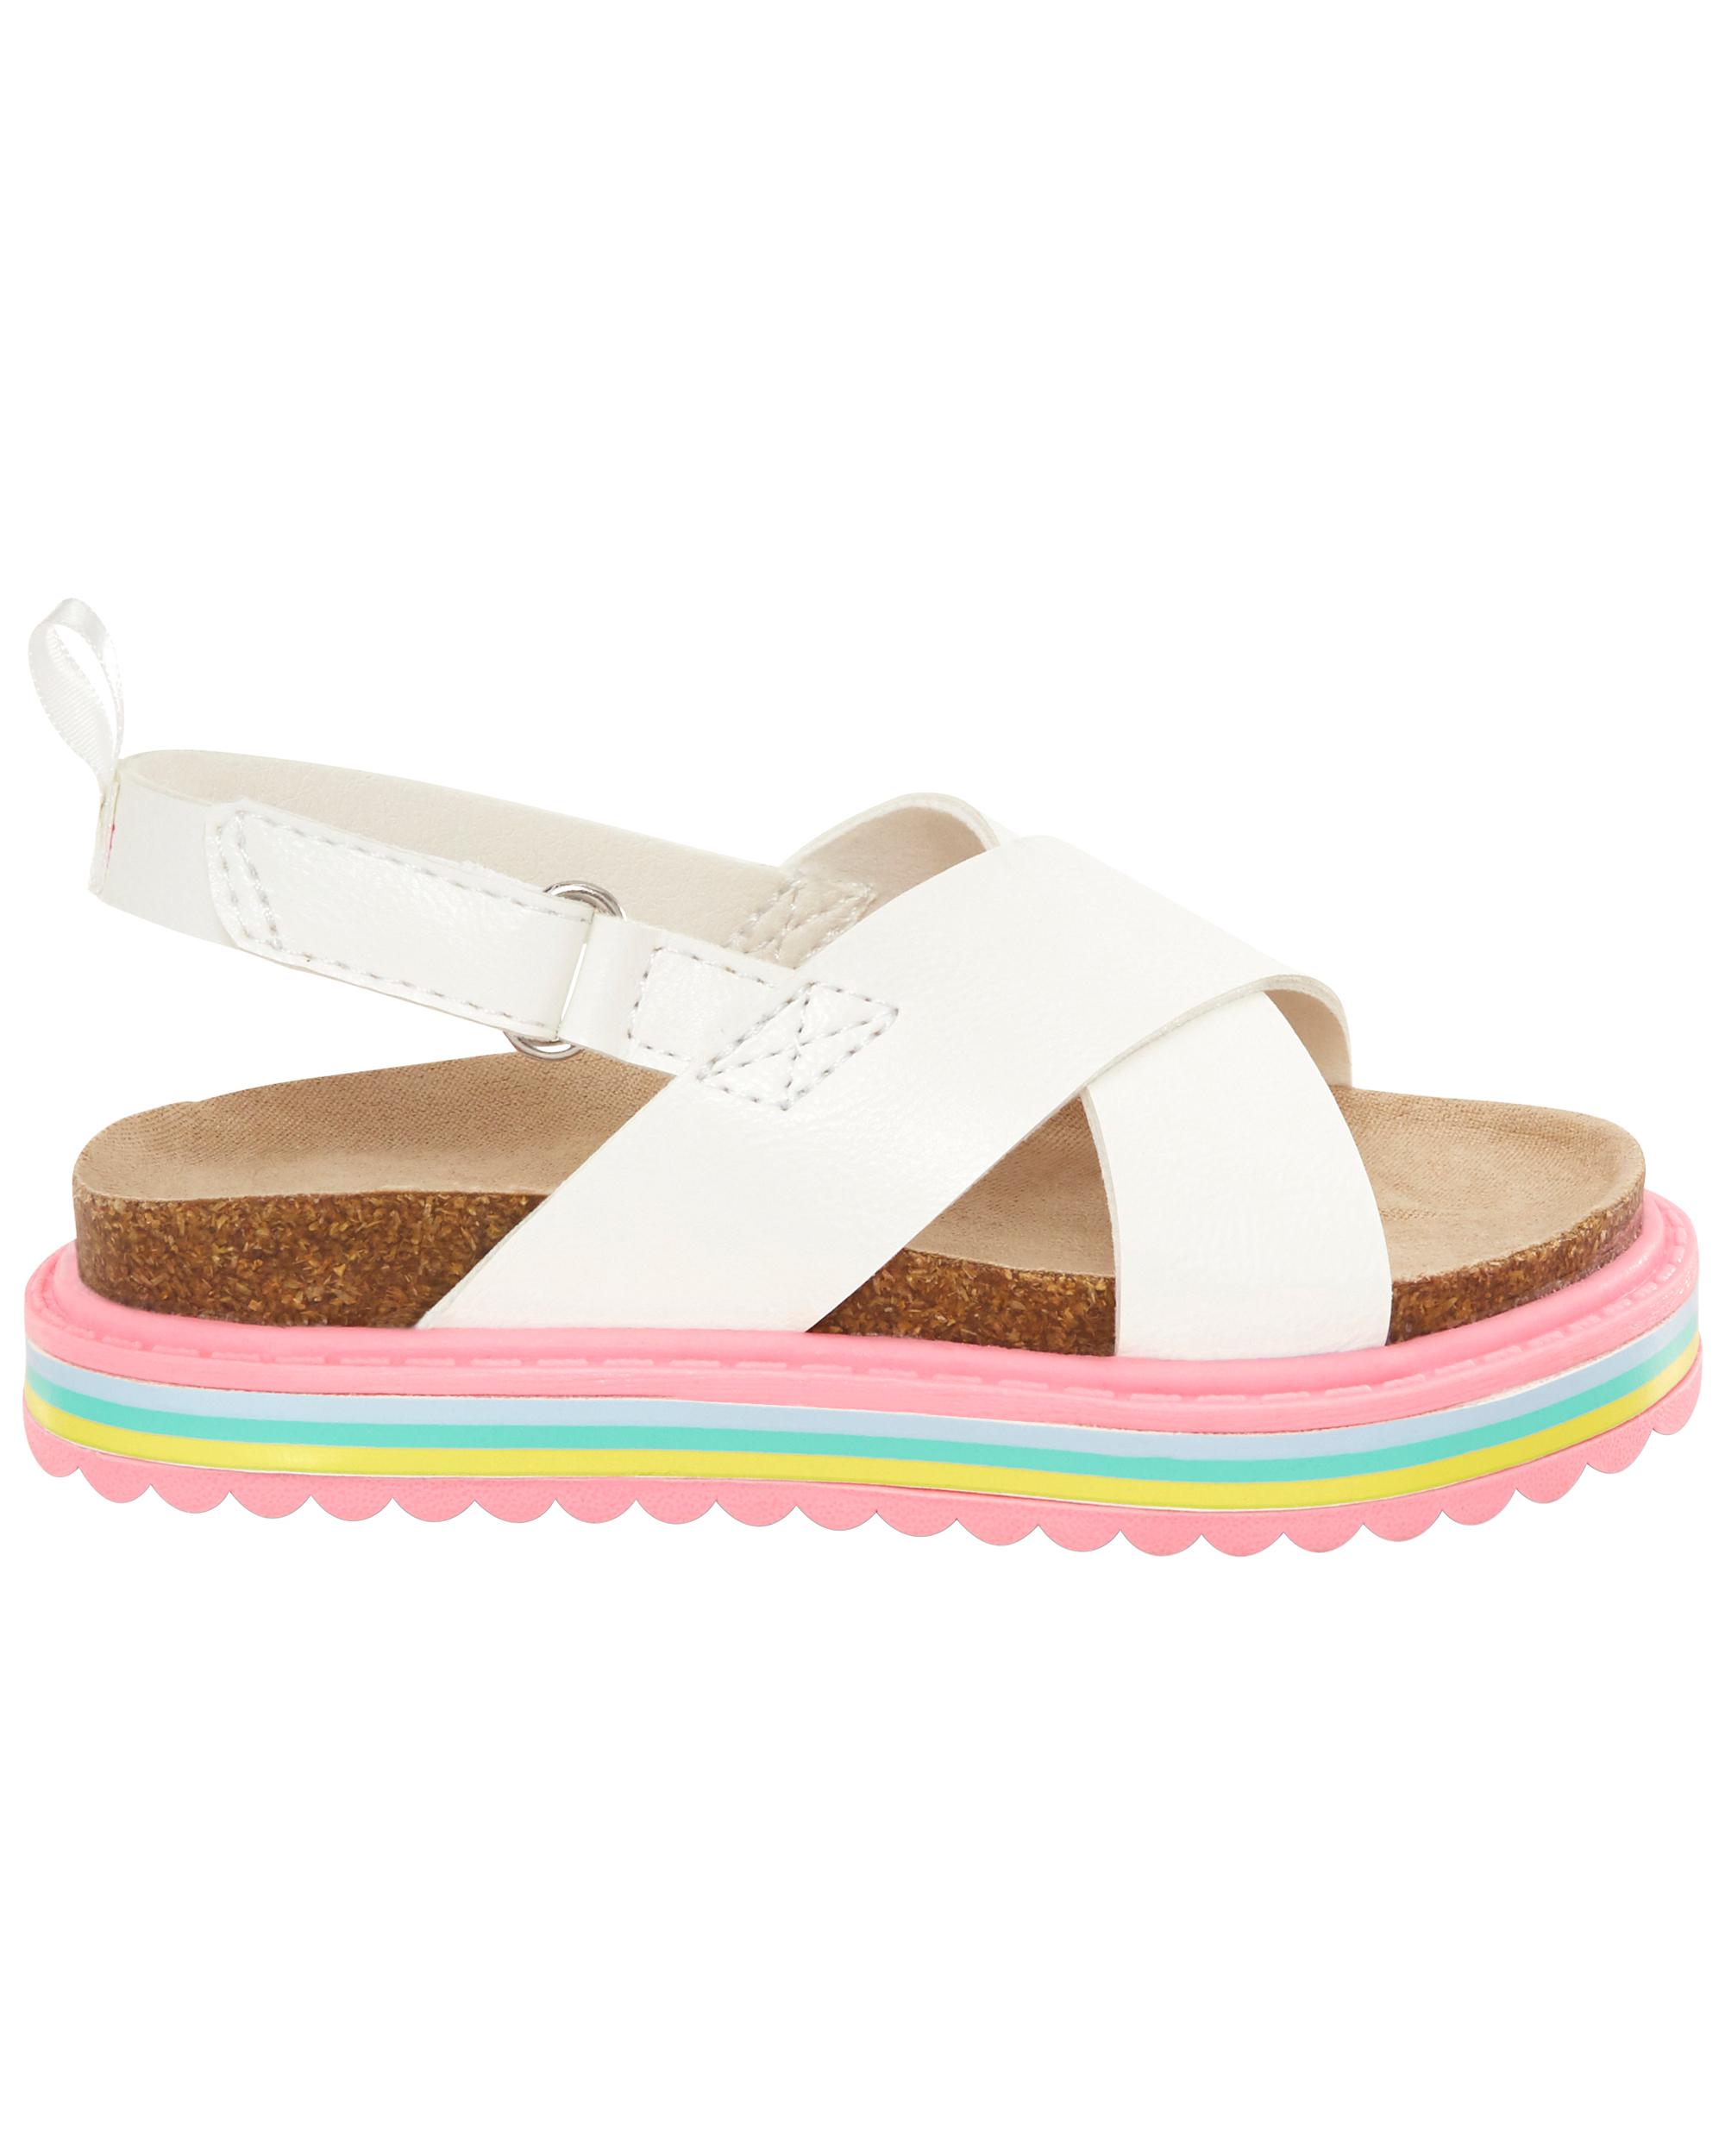 Toddler Stacked Sandals